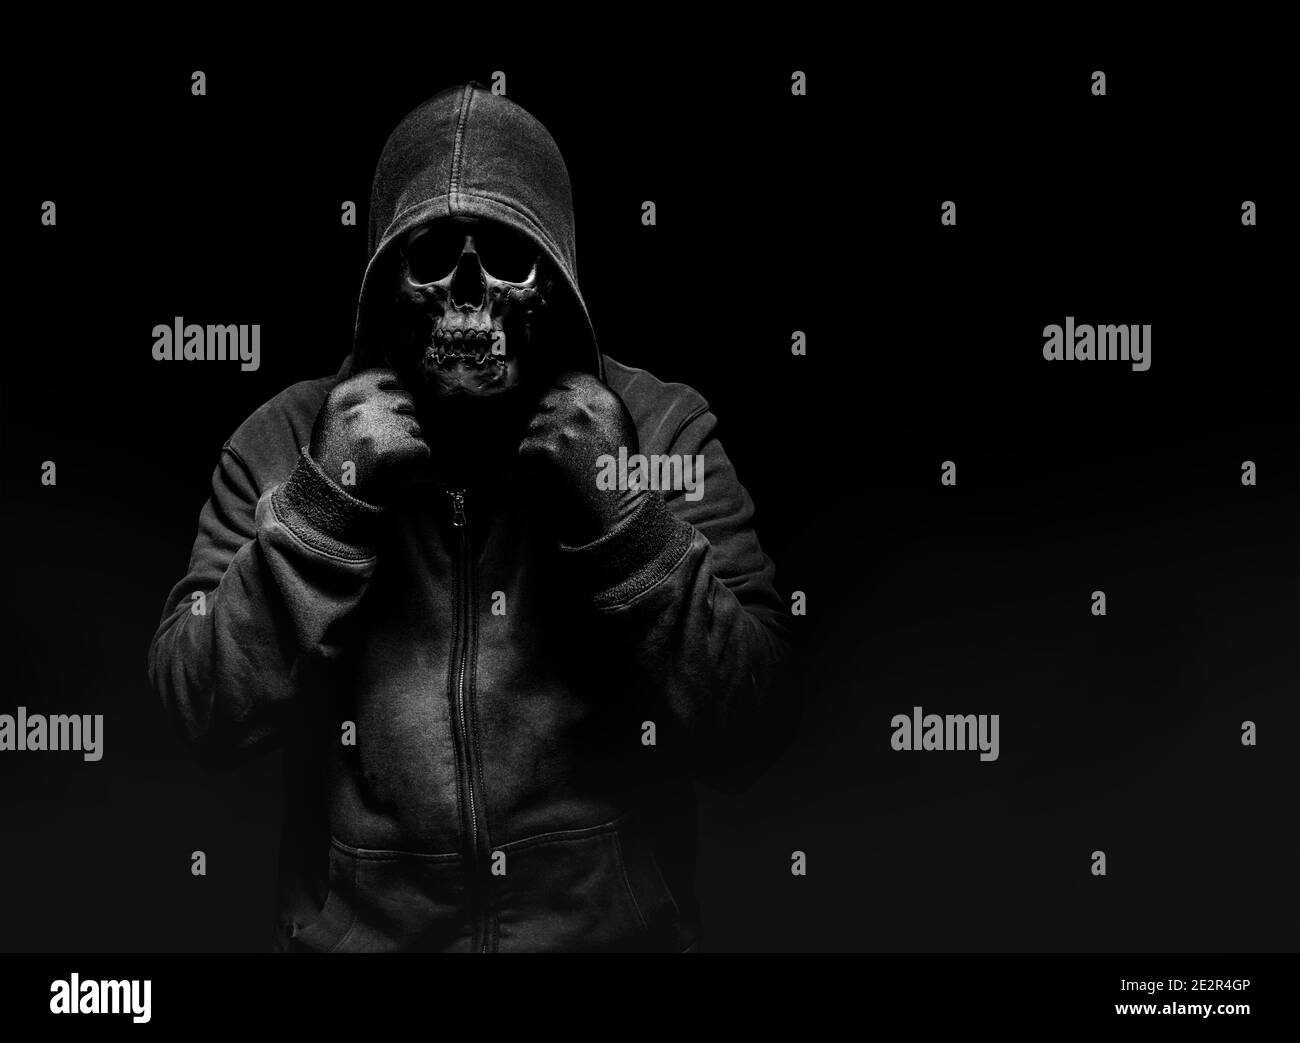 Horror photo of a scary man in hoodie with skull face on black background. Stock Photo